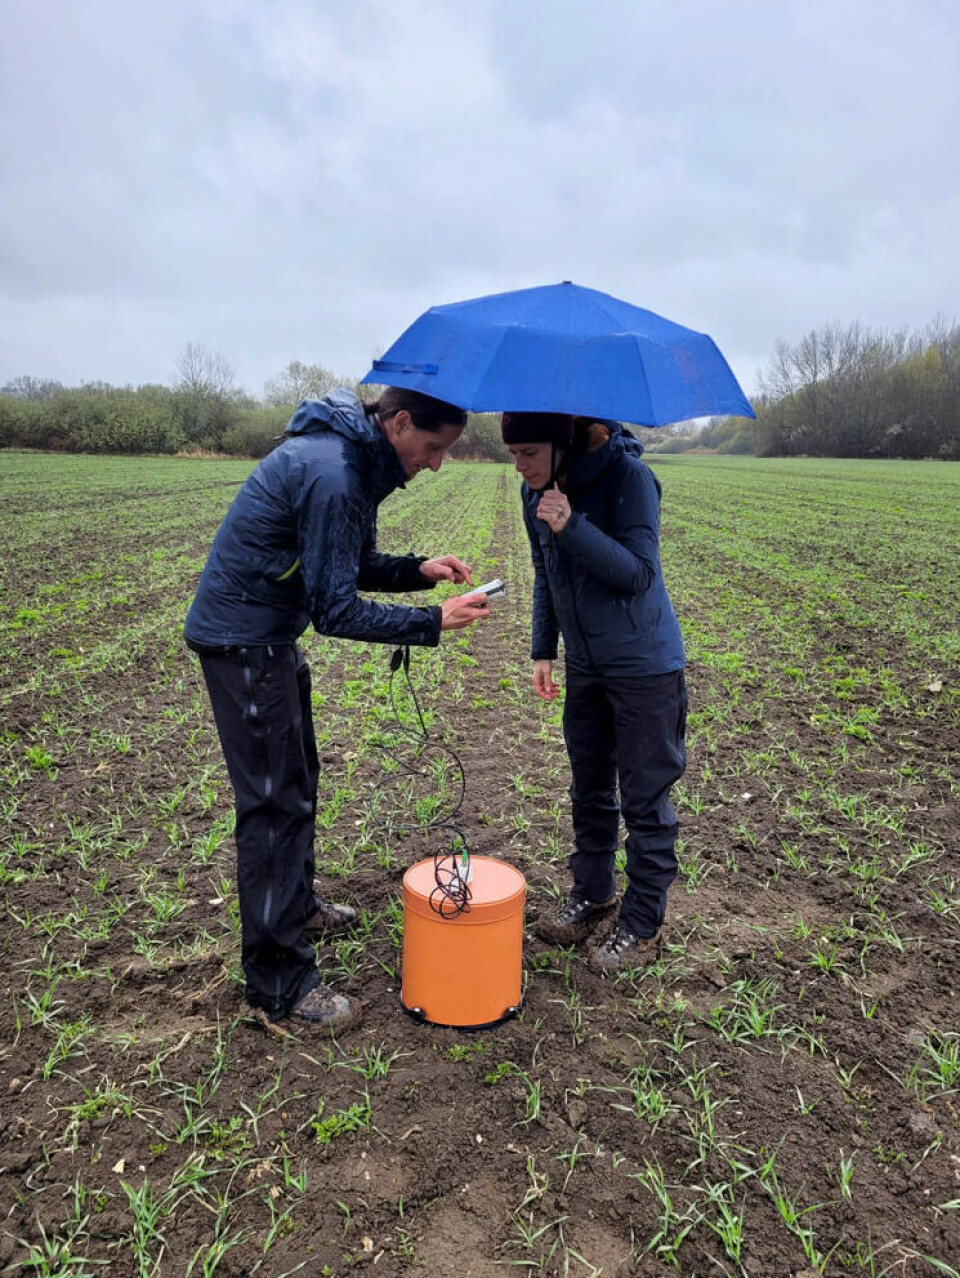 Come rain or shine, the researchers carry out their research.